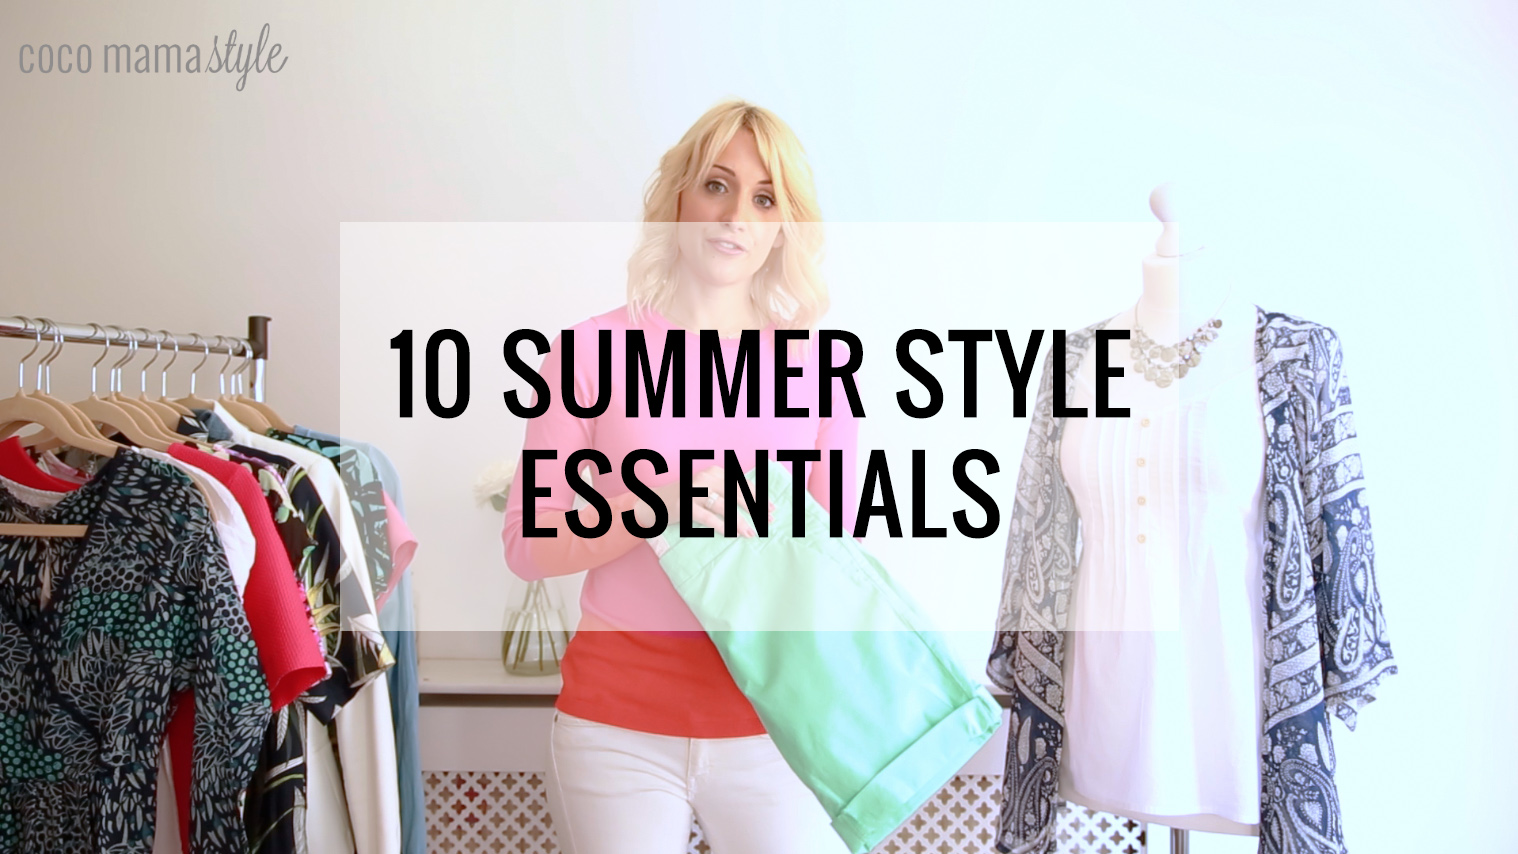 VIDEO 10 sumer style essentials with MANDMDIRECT cocomamastyle VIDEO